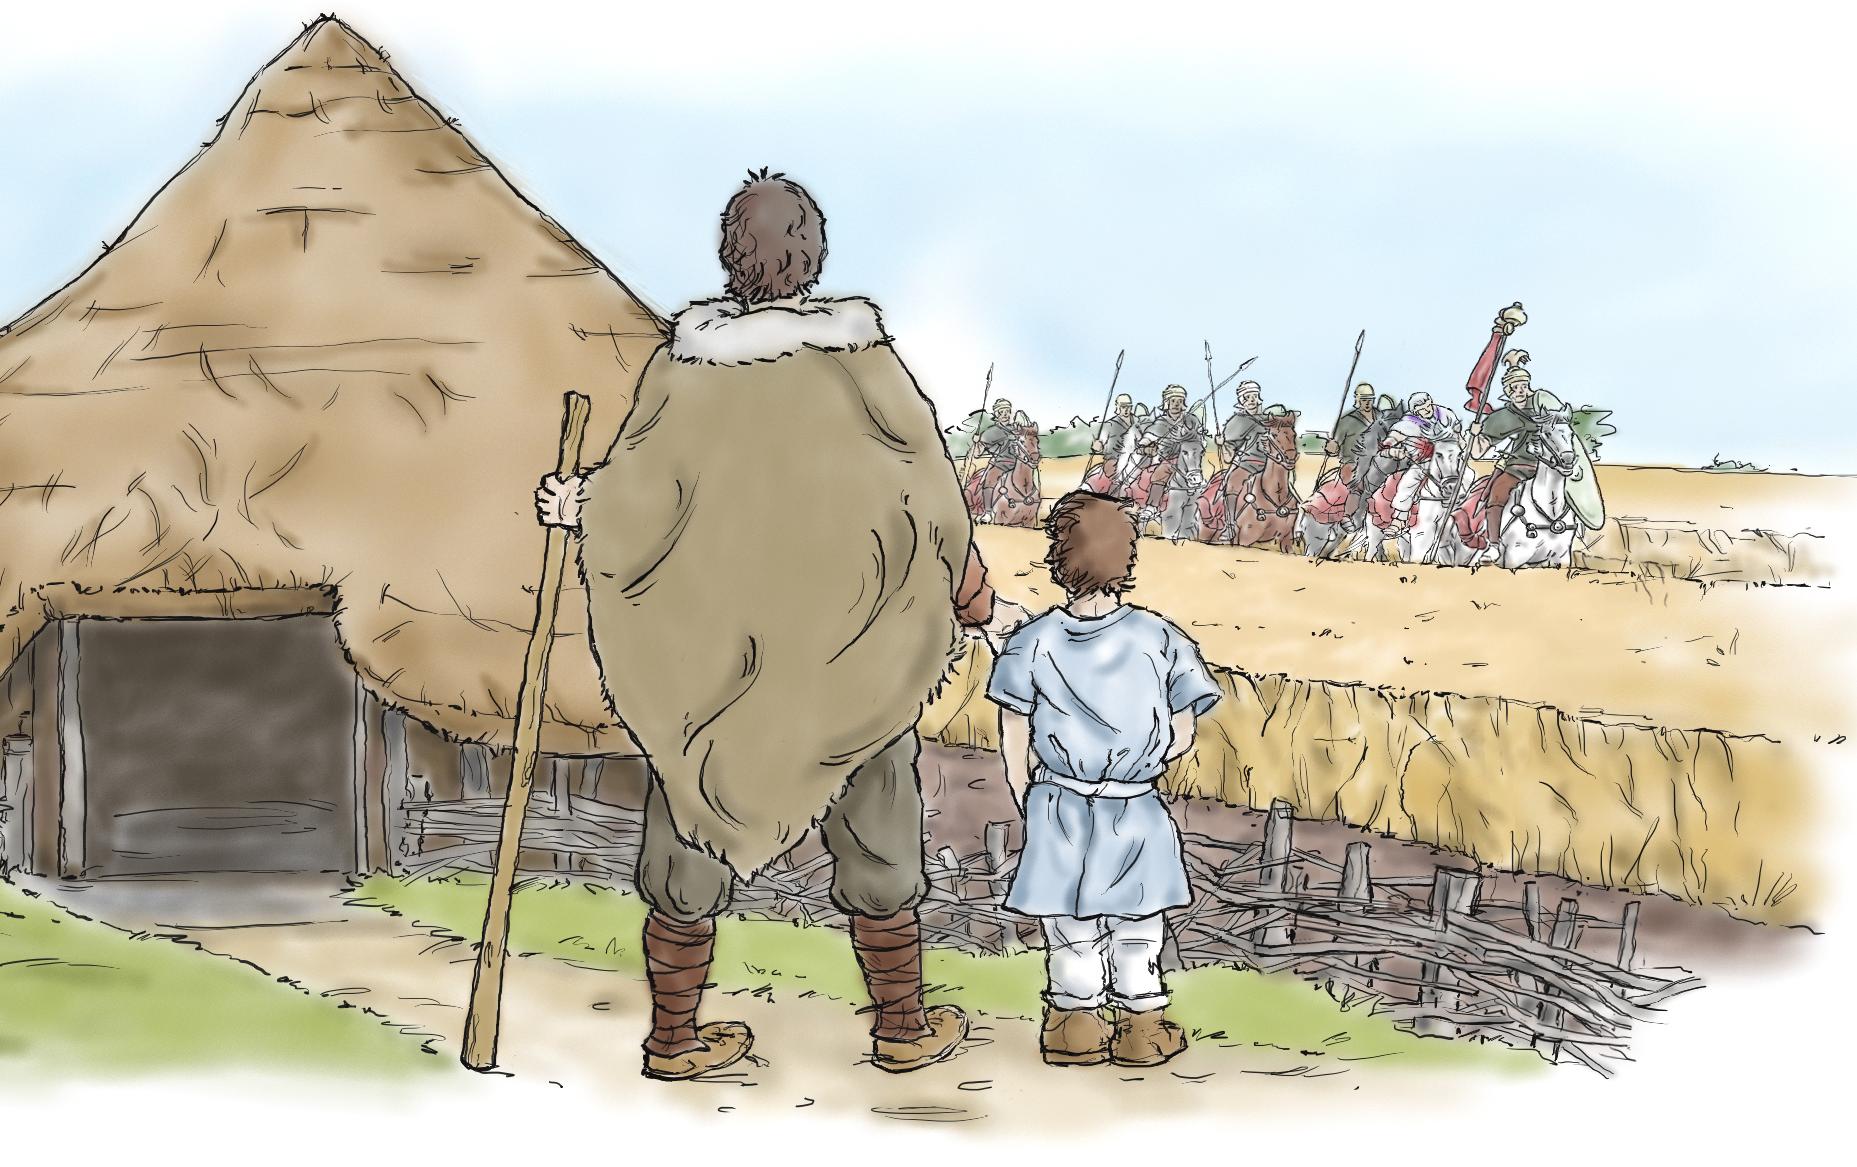 An illustration from Stage 13 of the new UK 5th Edition of Book II. The image shows a father and son watching Salvius arrive with Roman troops on horseback.